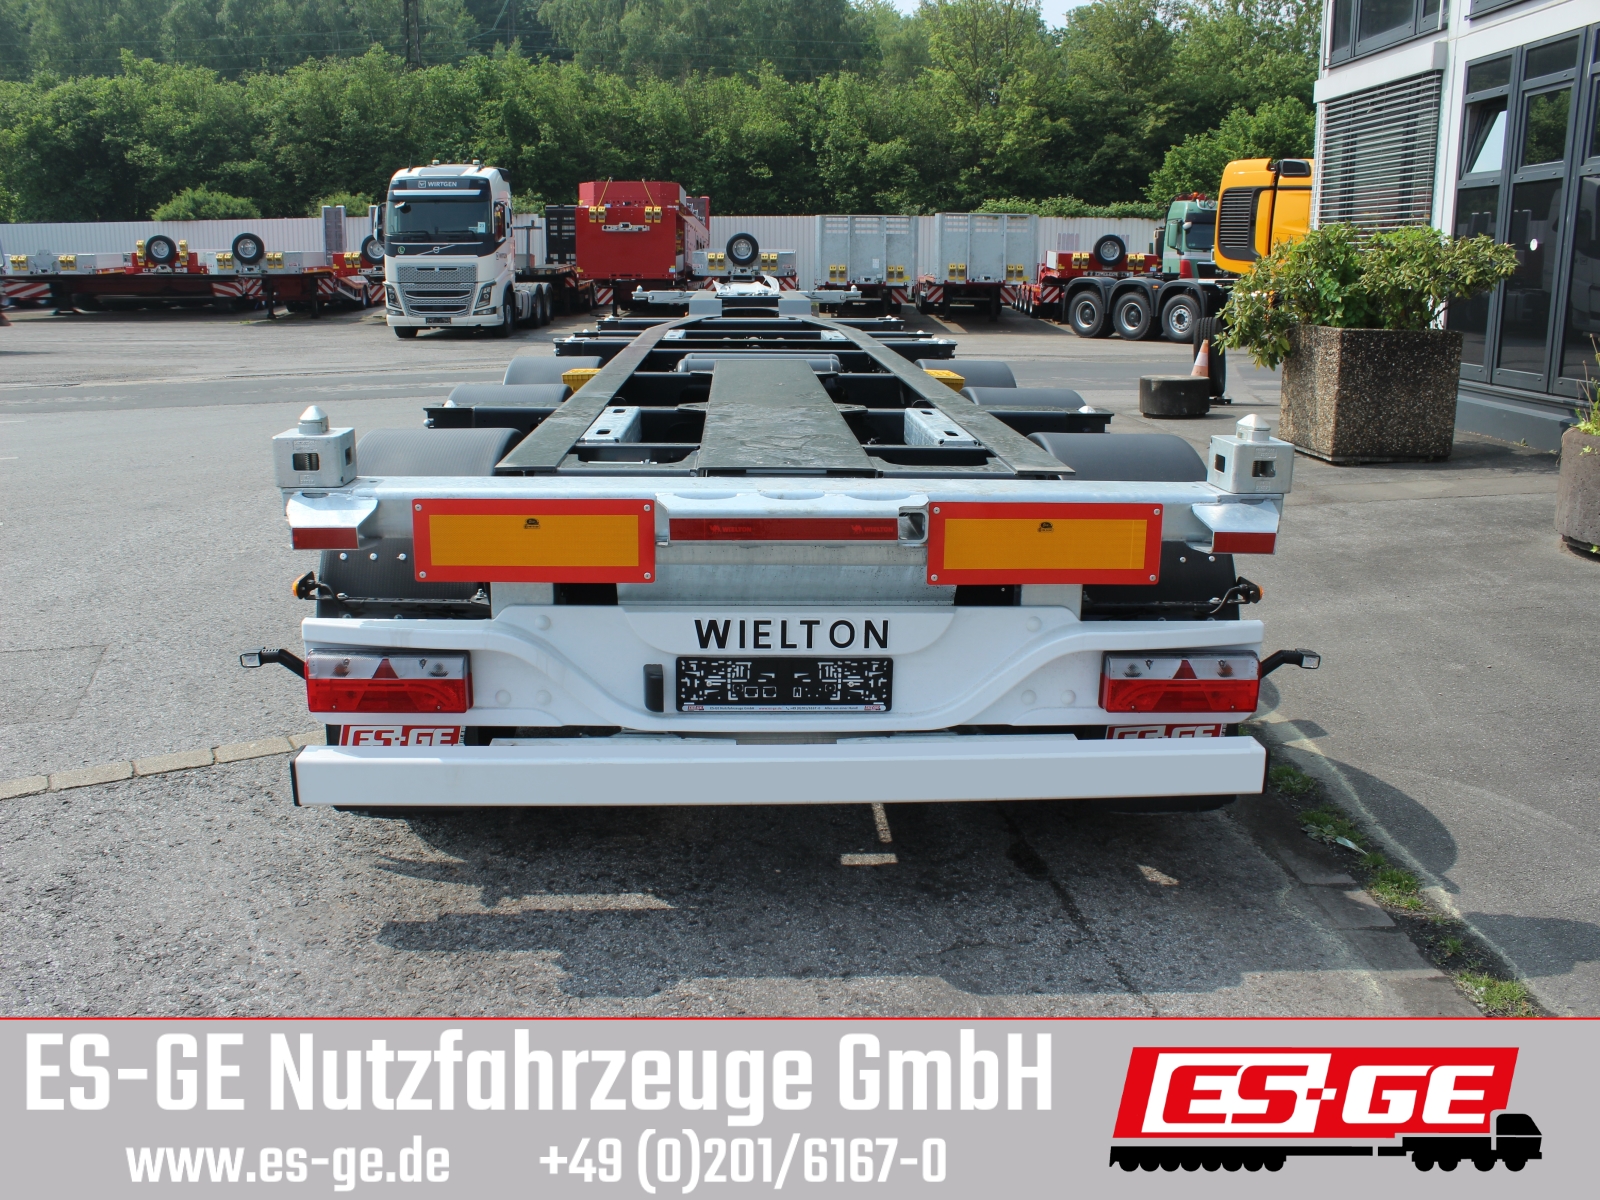 Wielton 3-Achs-Containerchassis - multifunktional